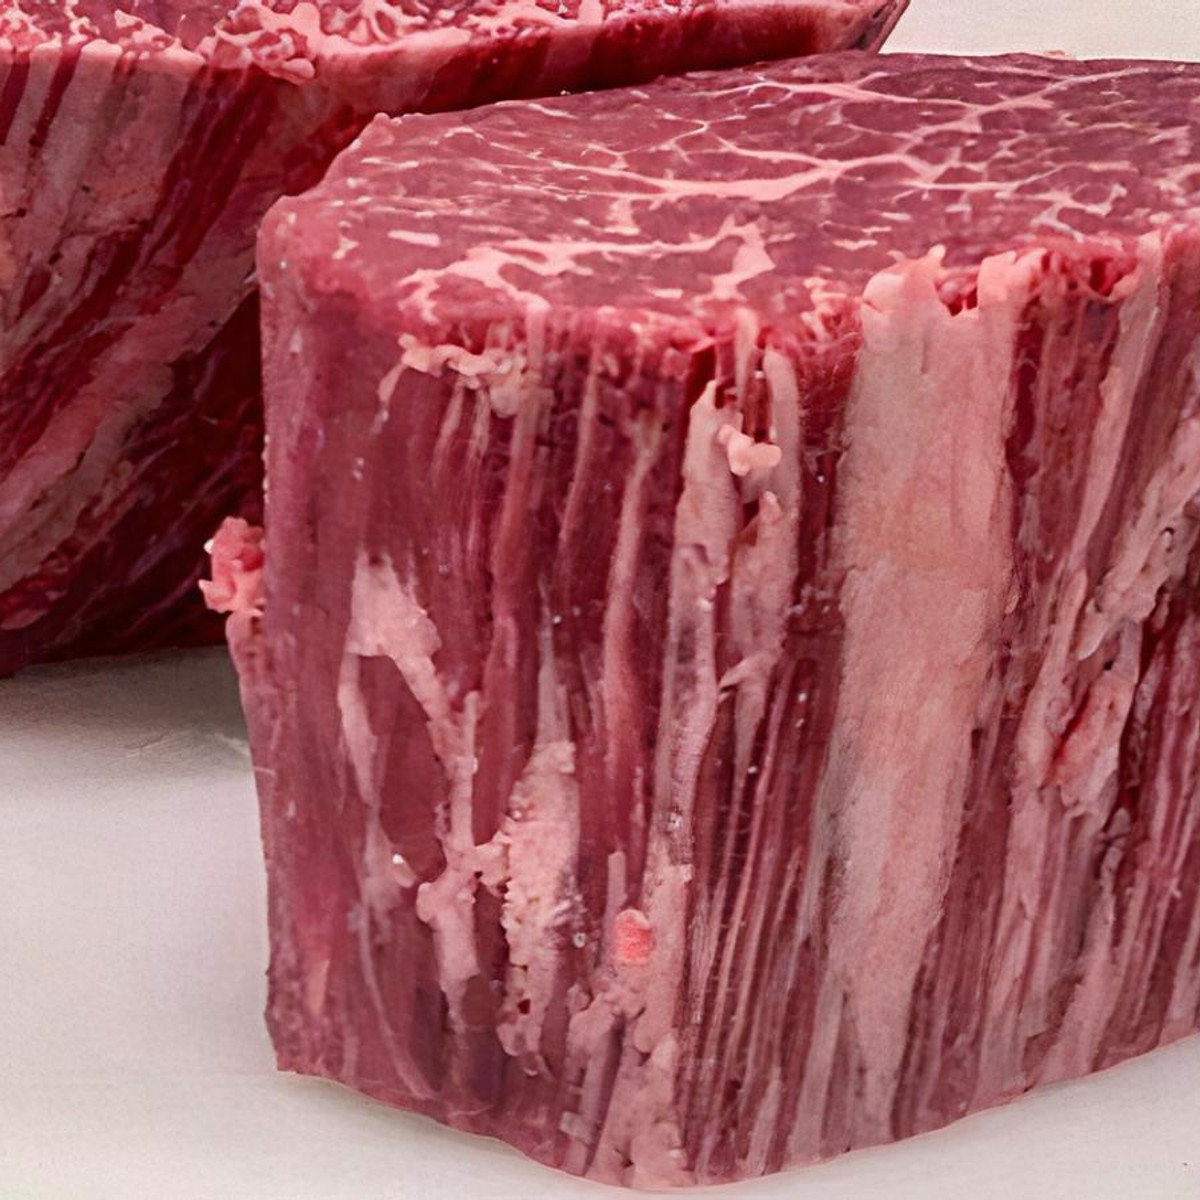 Wagyu 8oz Filets Marble Score 6-7 | Purely Meat